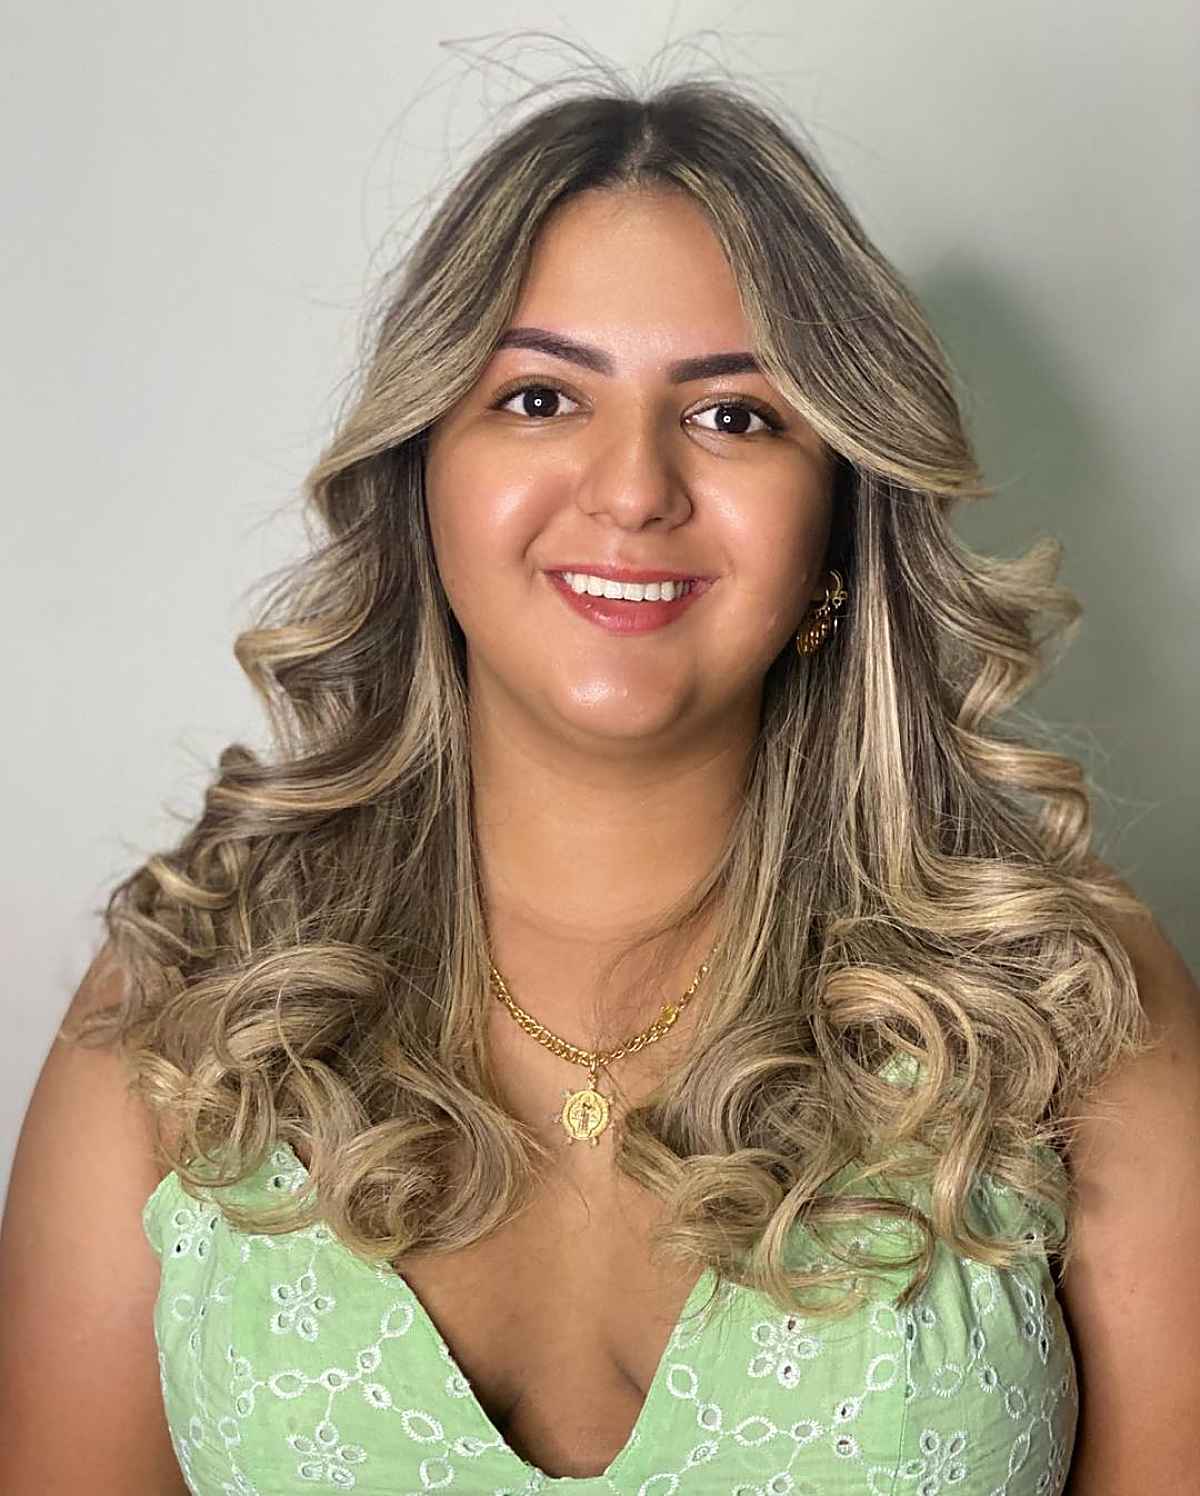 Easy Curled Hairstyle with a Middle Part for Double Chins